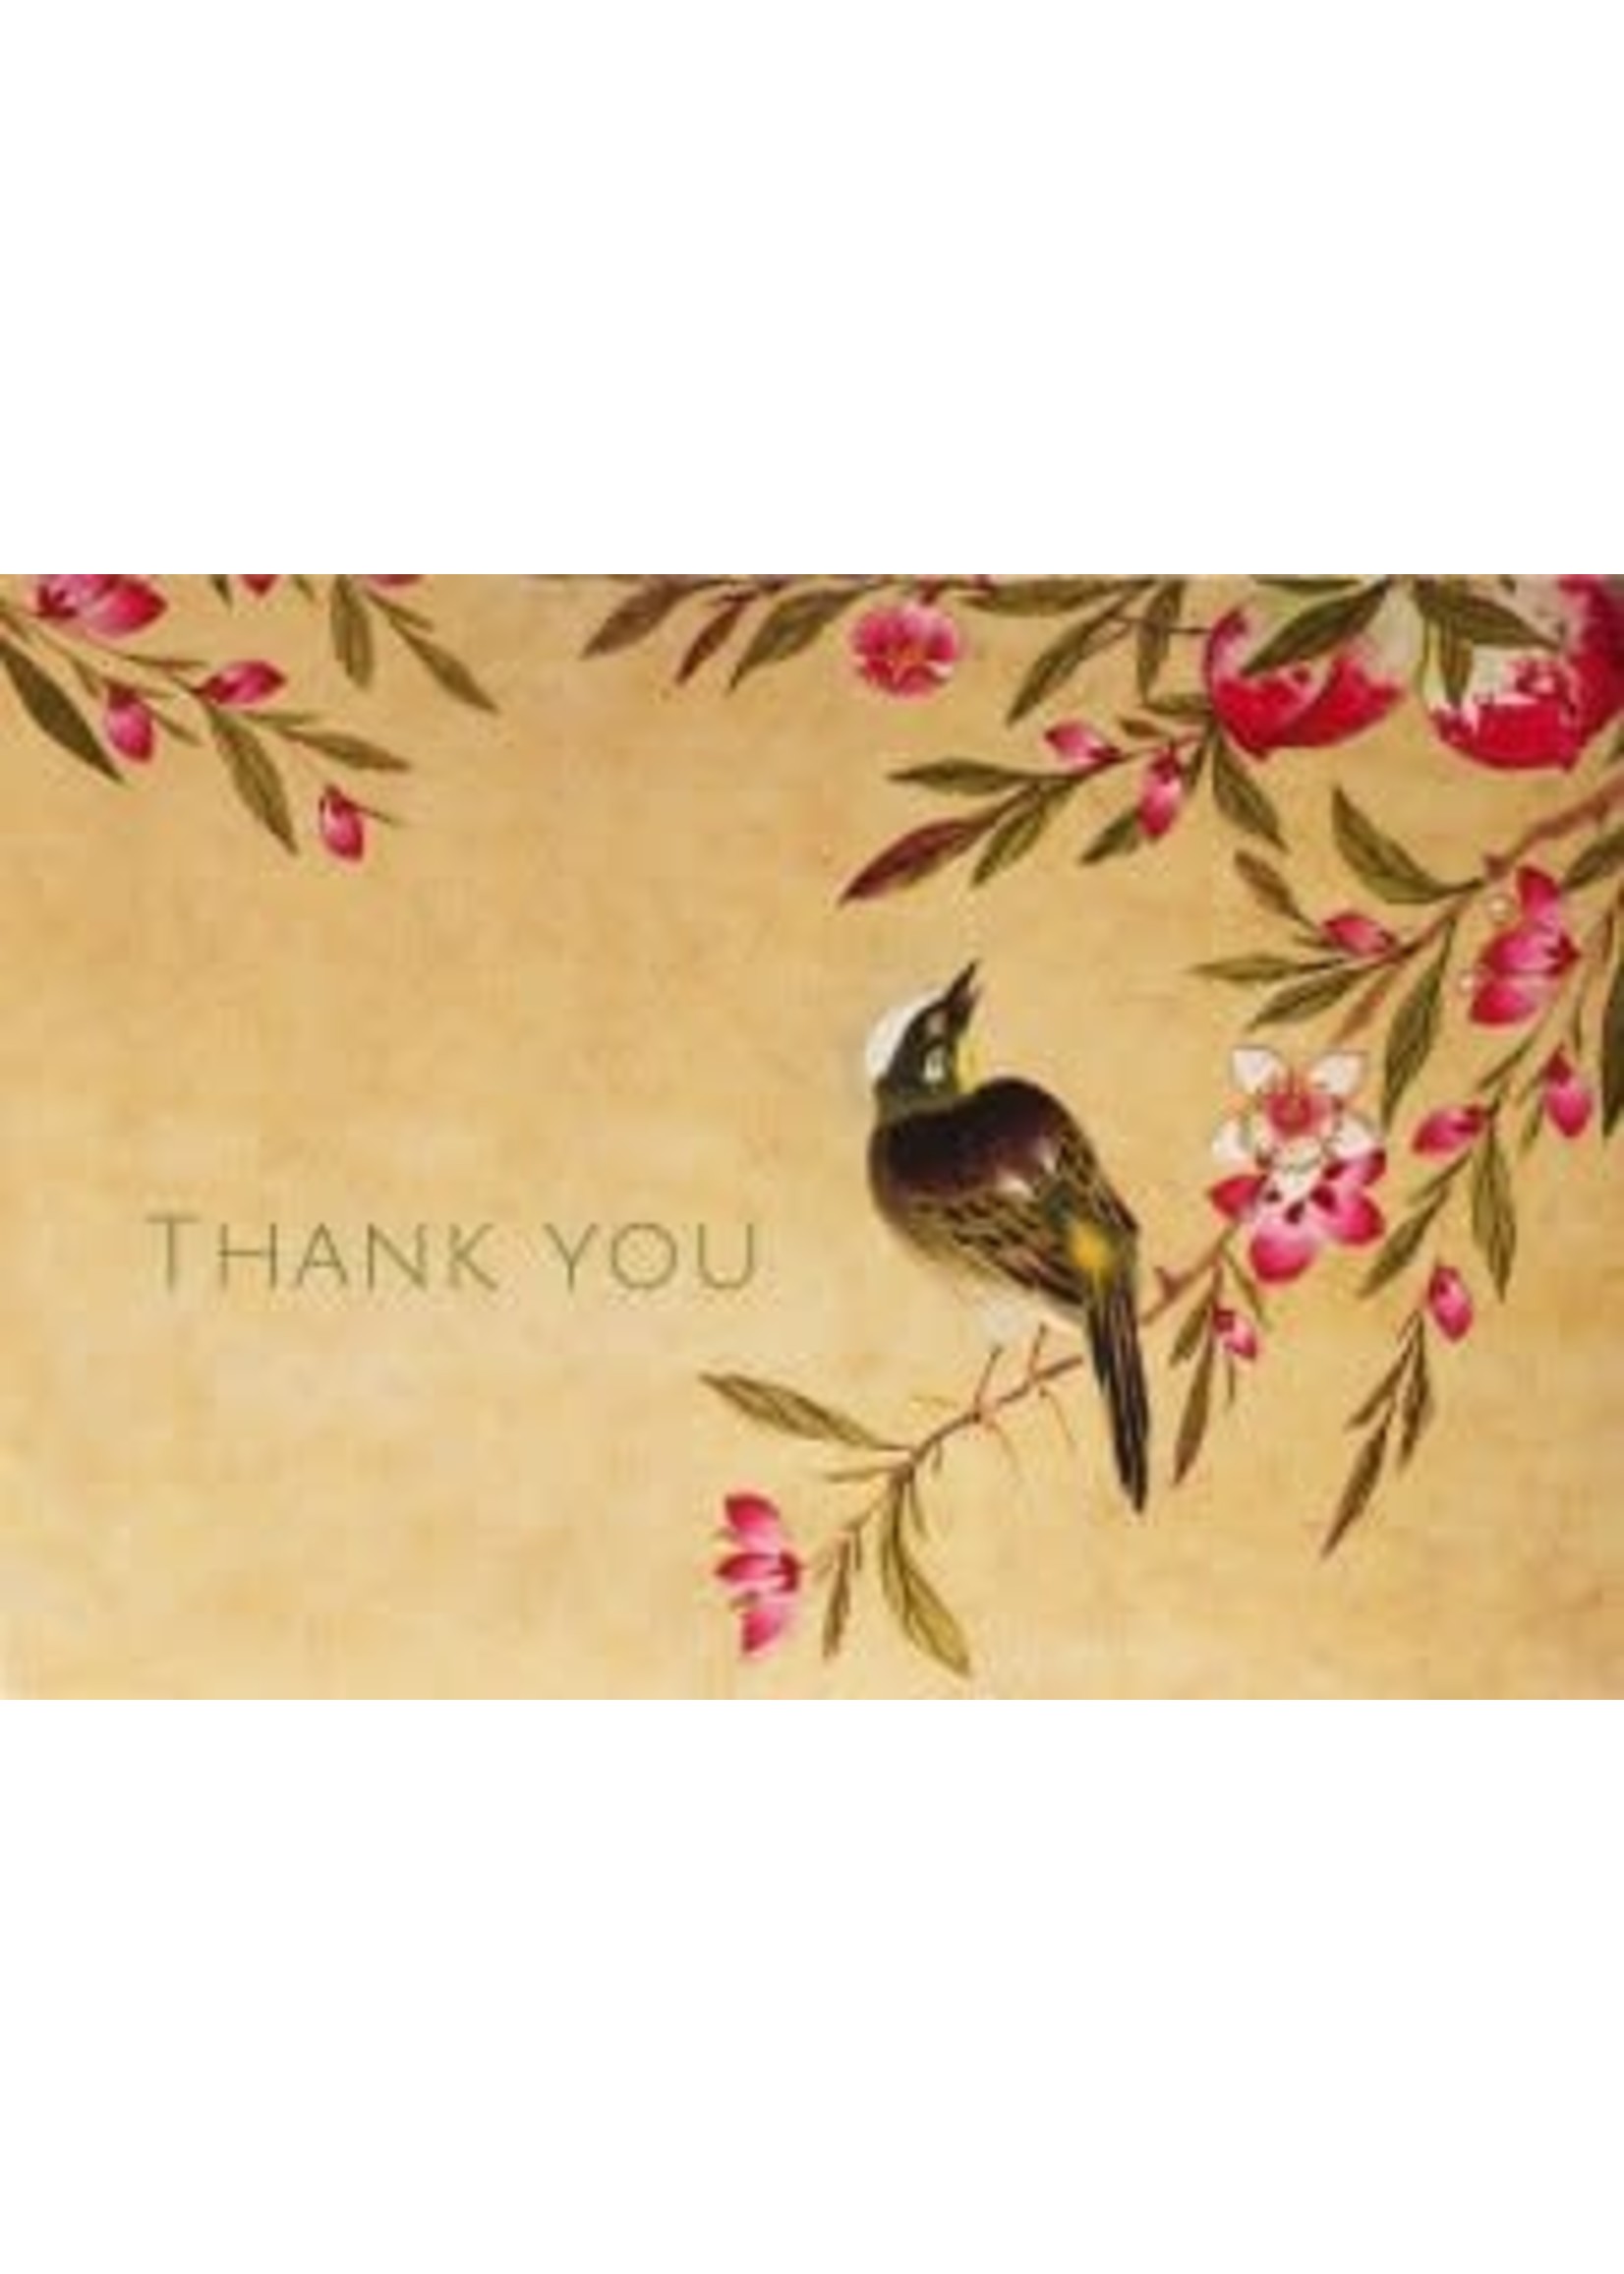 Peter Pauper Press Boxed Gold Thank You Cards: Peach Blossoms